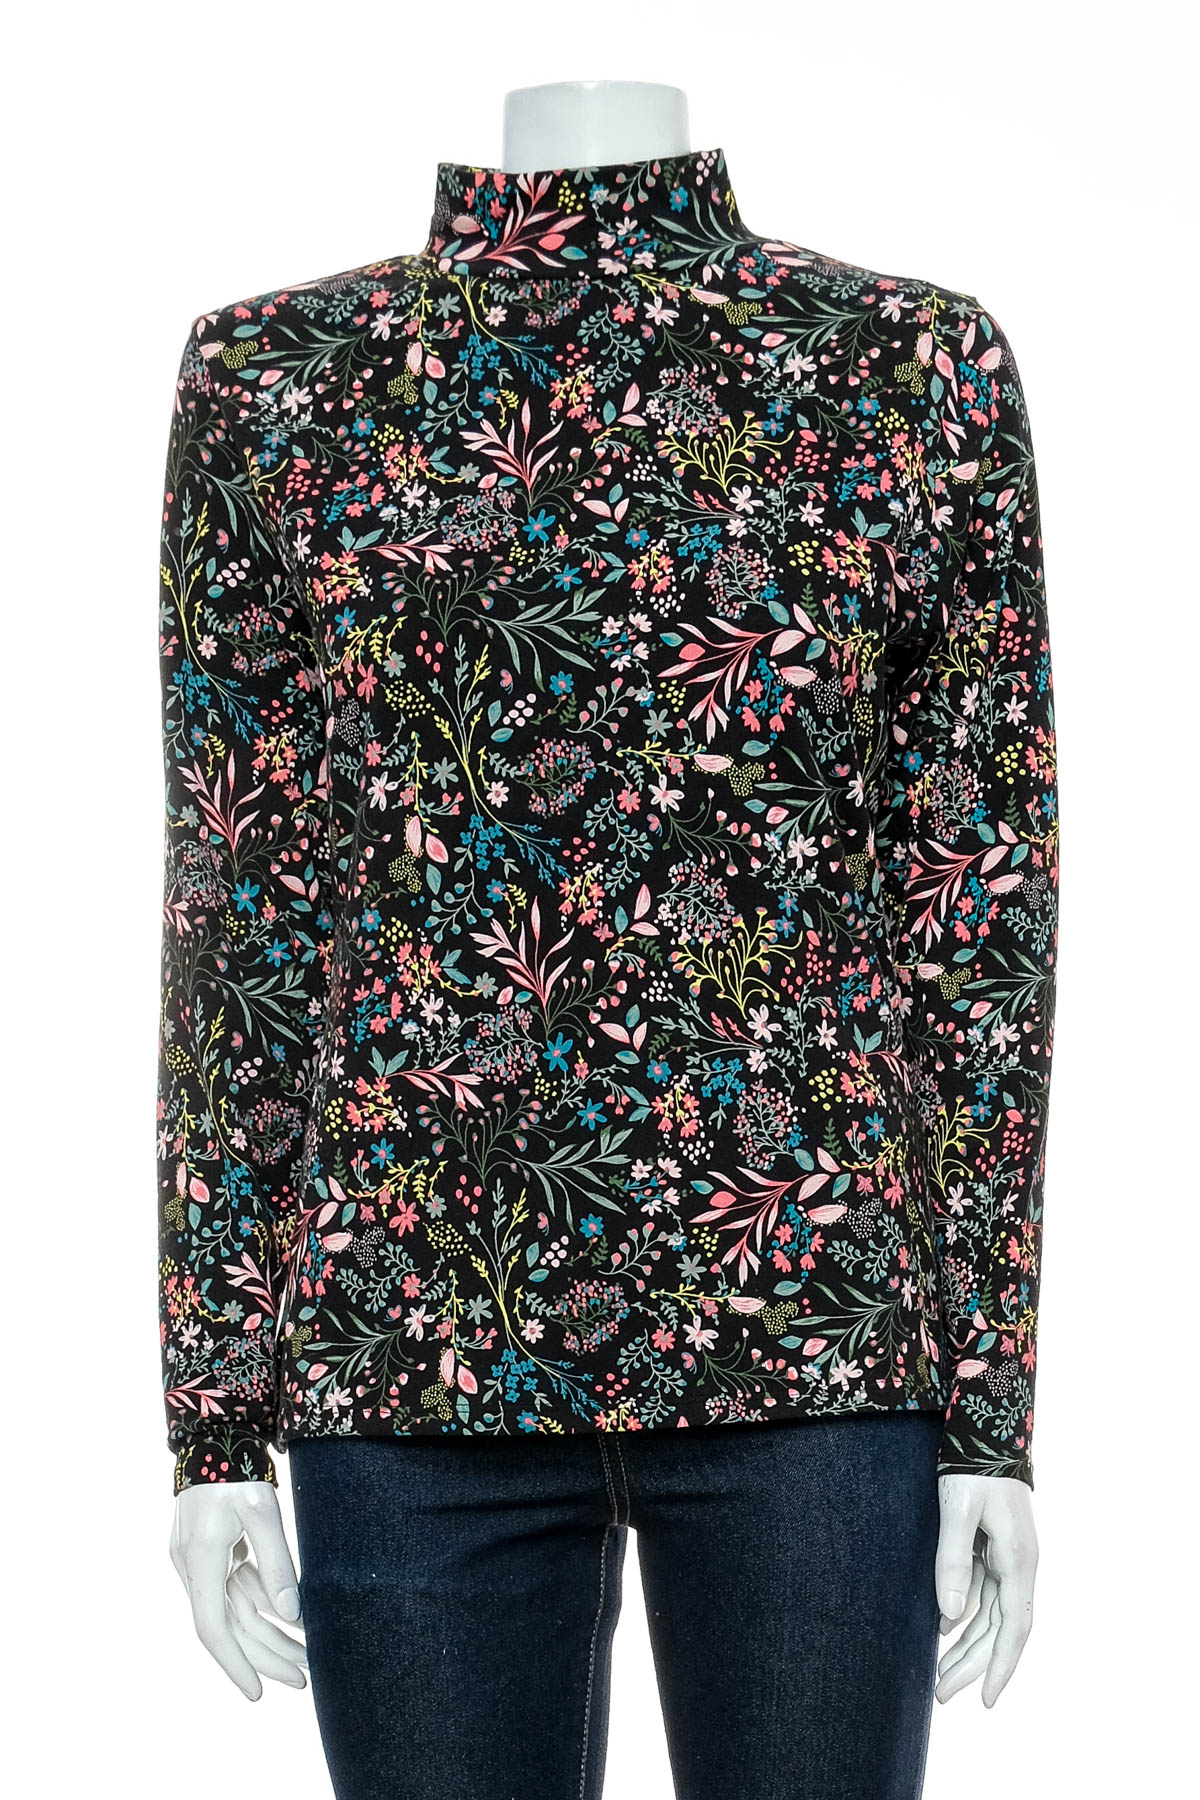 Women's blouse - M&S COLLECTION - 0